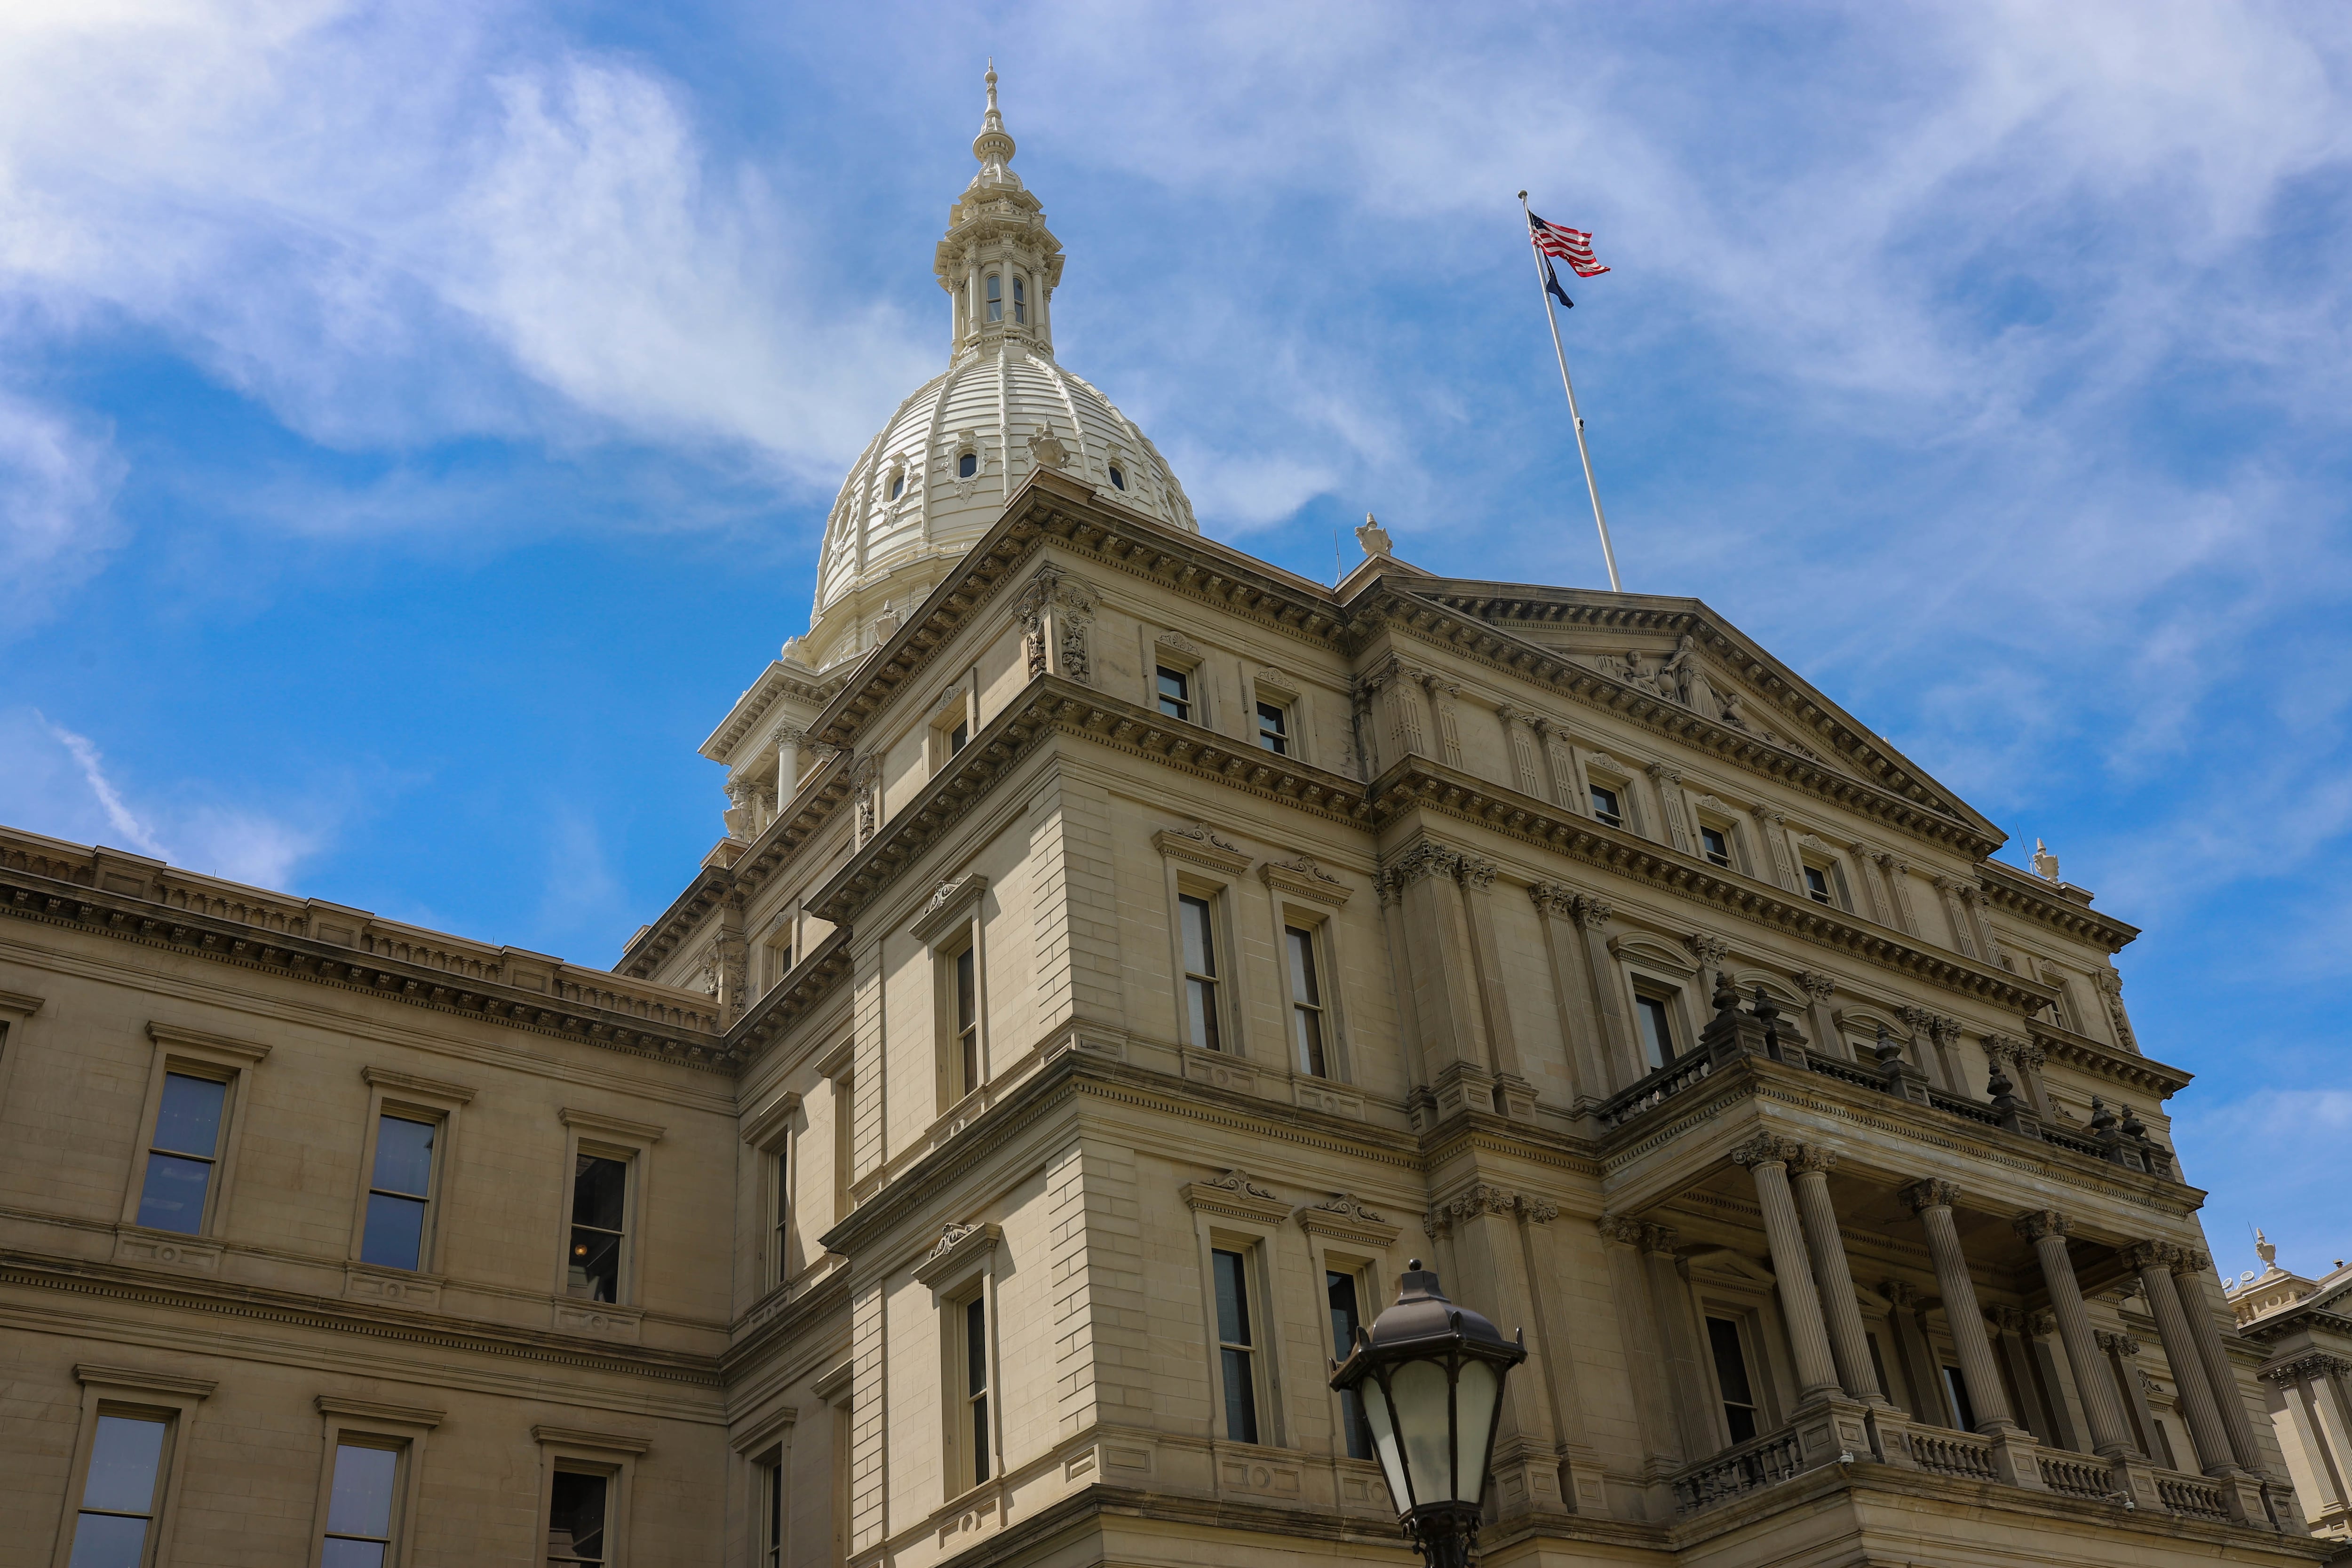 The Michigan state Capitol building in Lansing on a sunny day with wispy clouds.